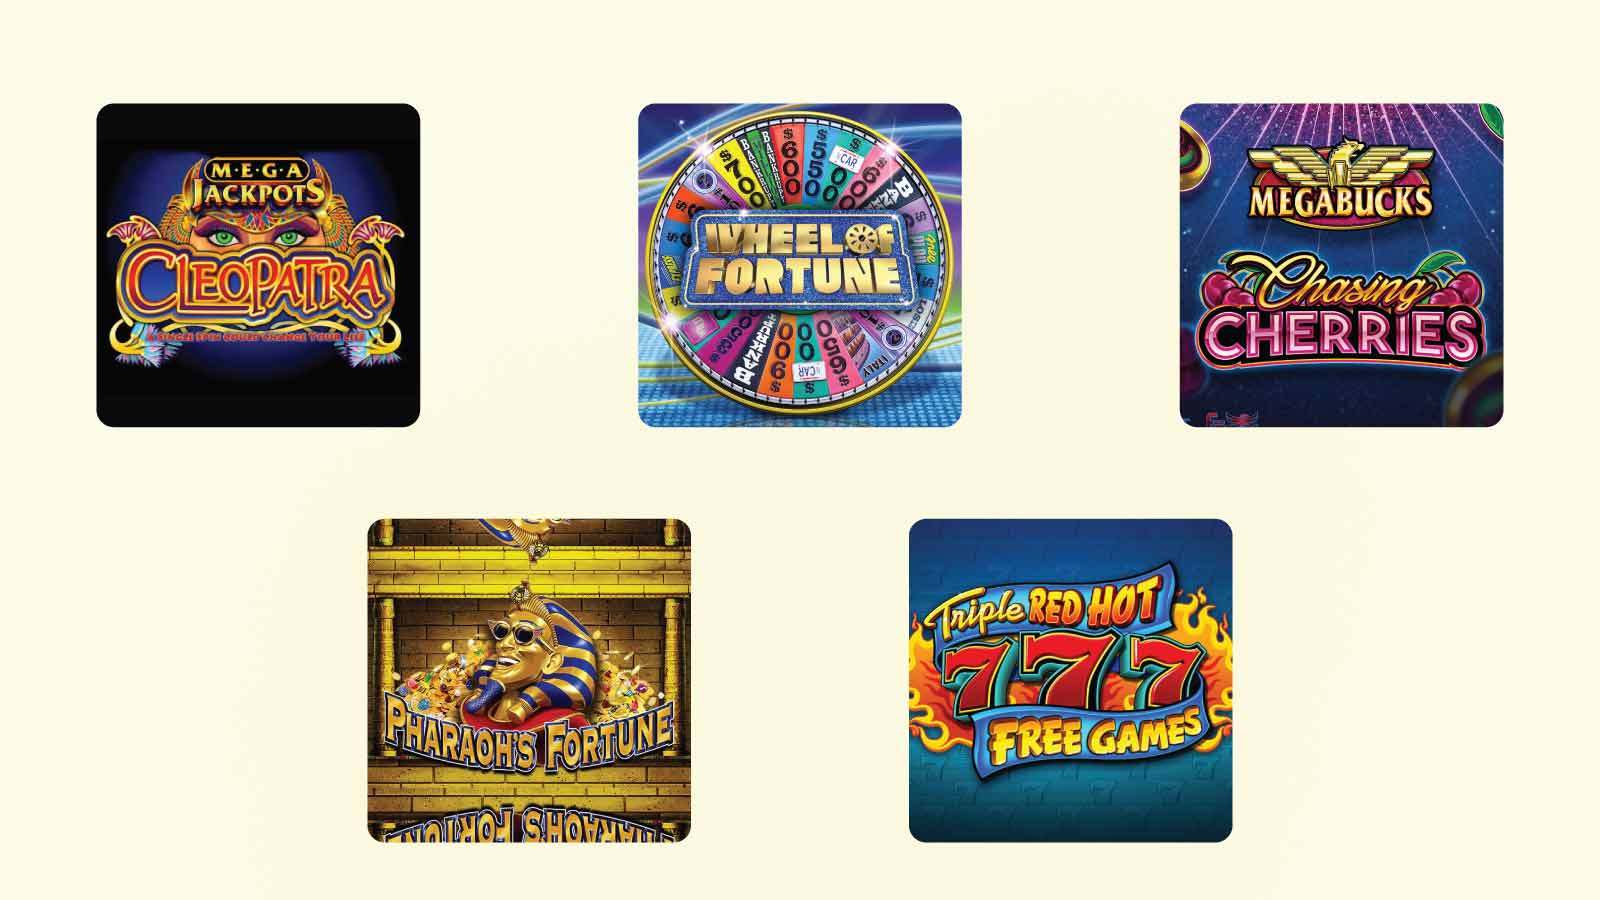 Our recommended IGT jackpots